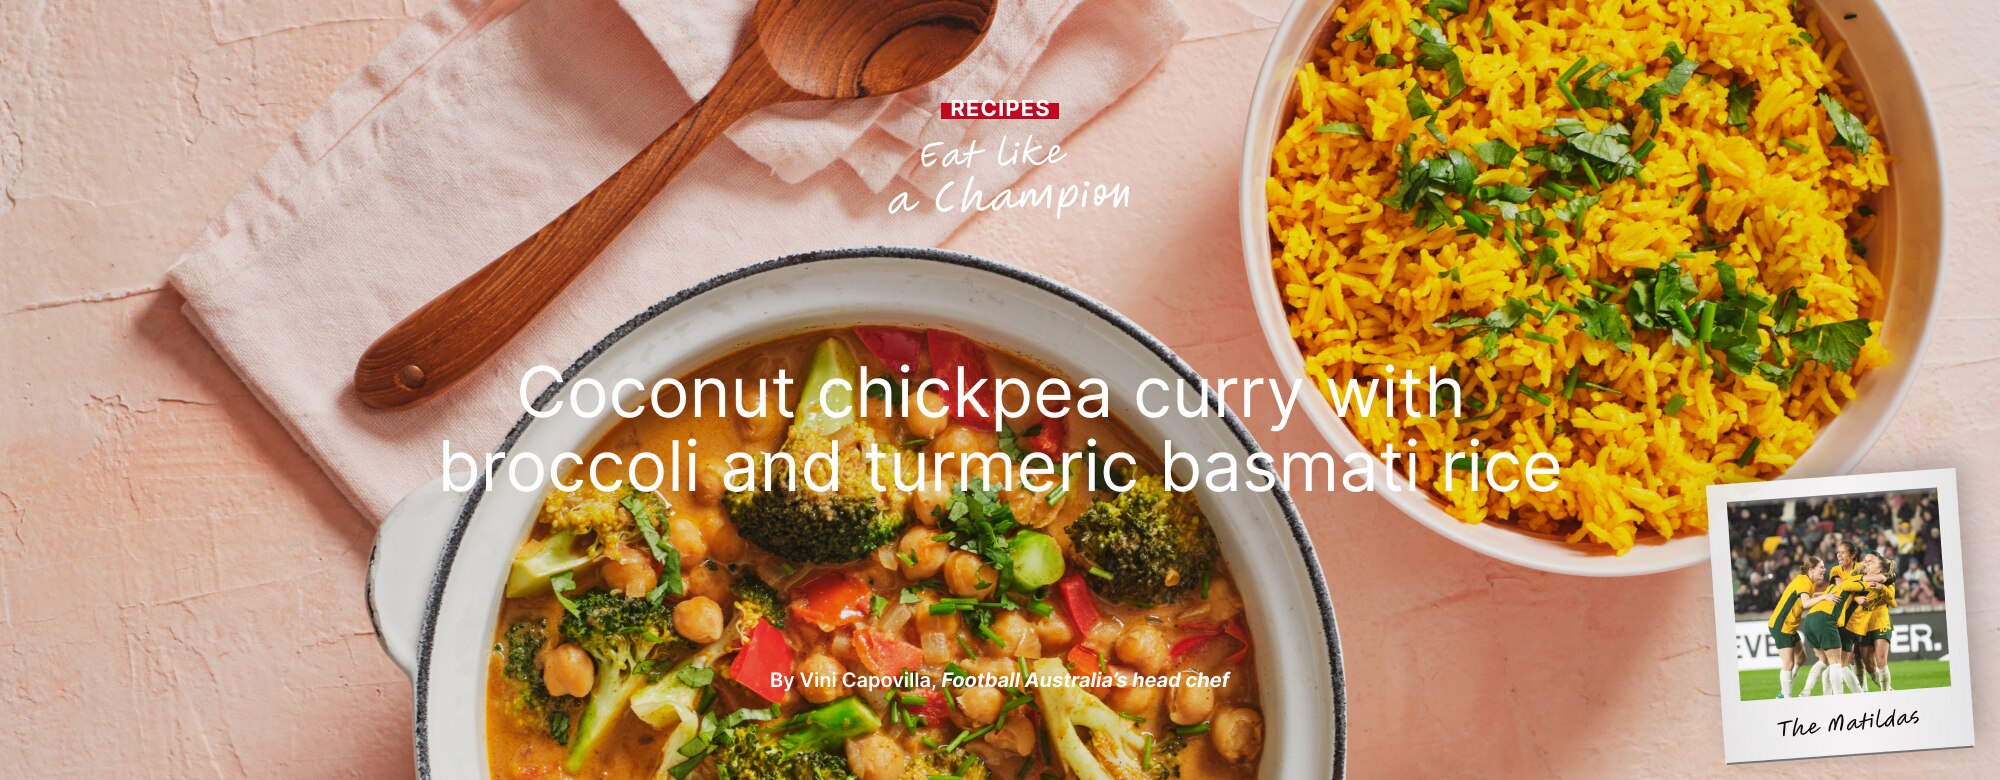 Coconut chickpea curry with broccoli and turmeric basmati rice